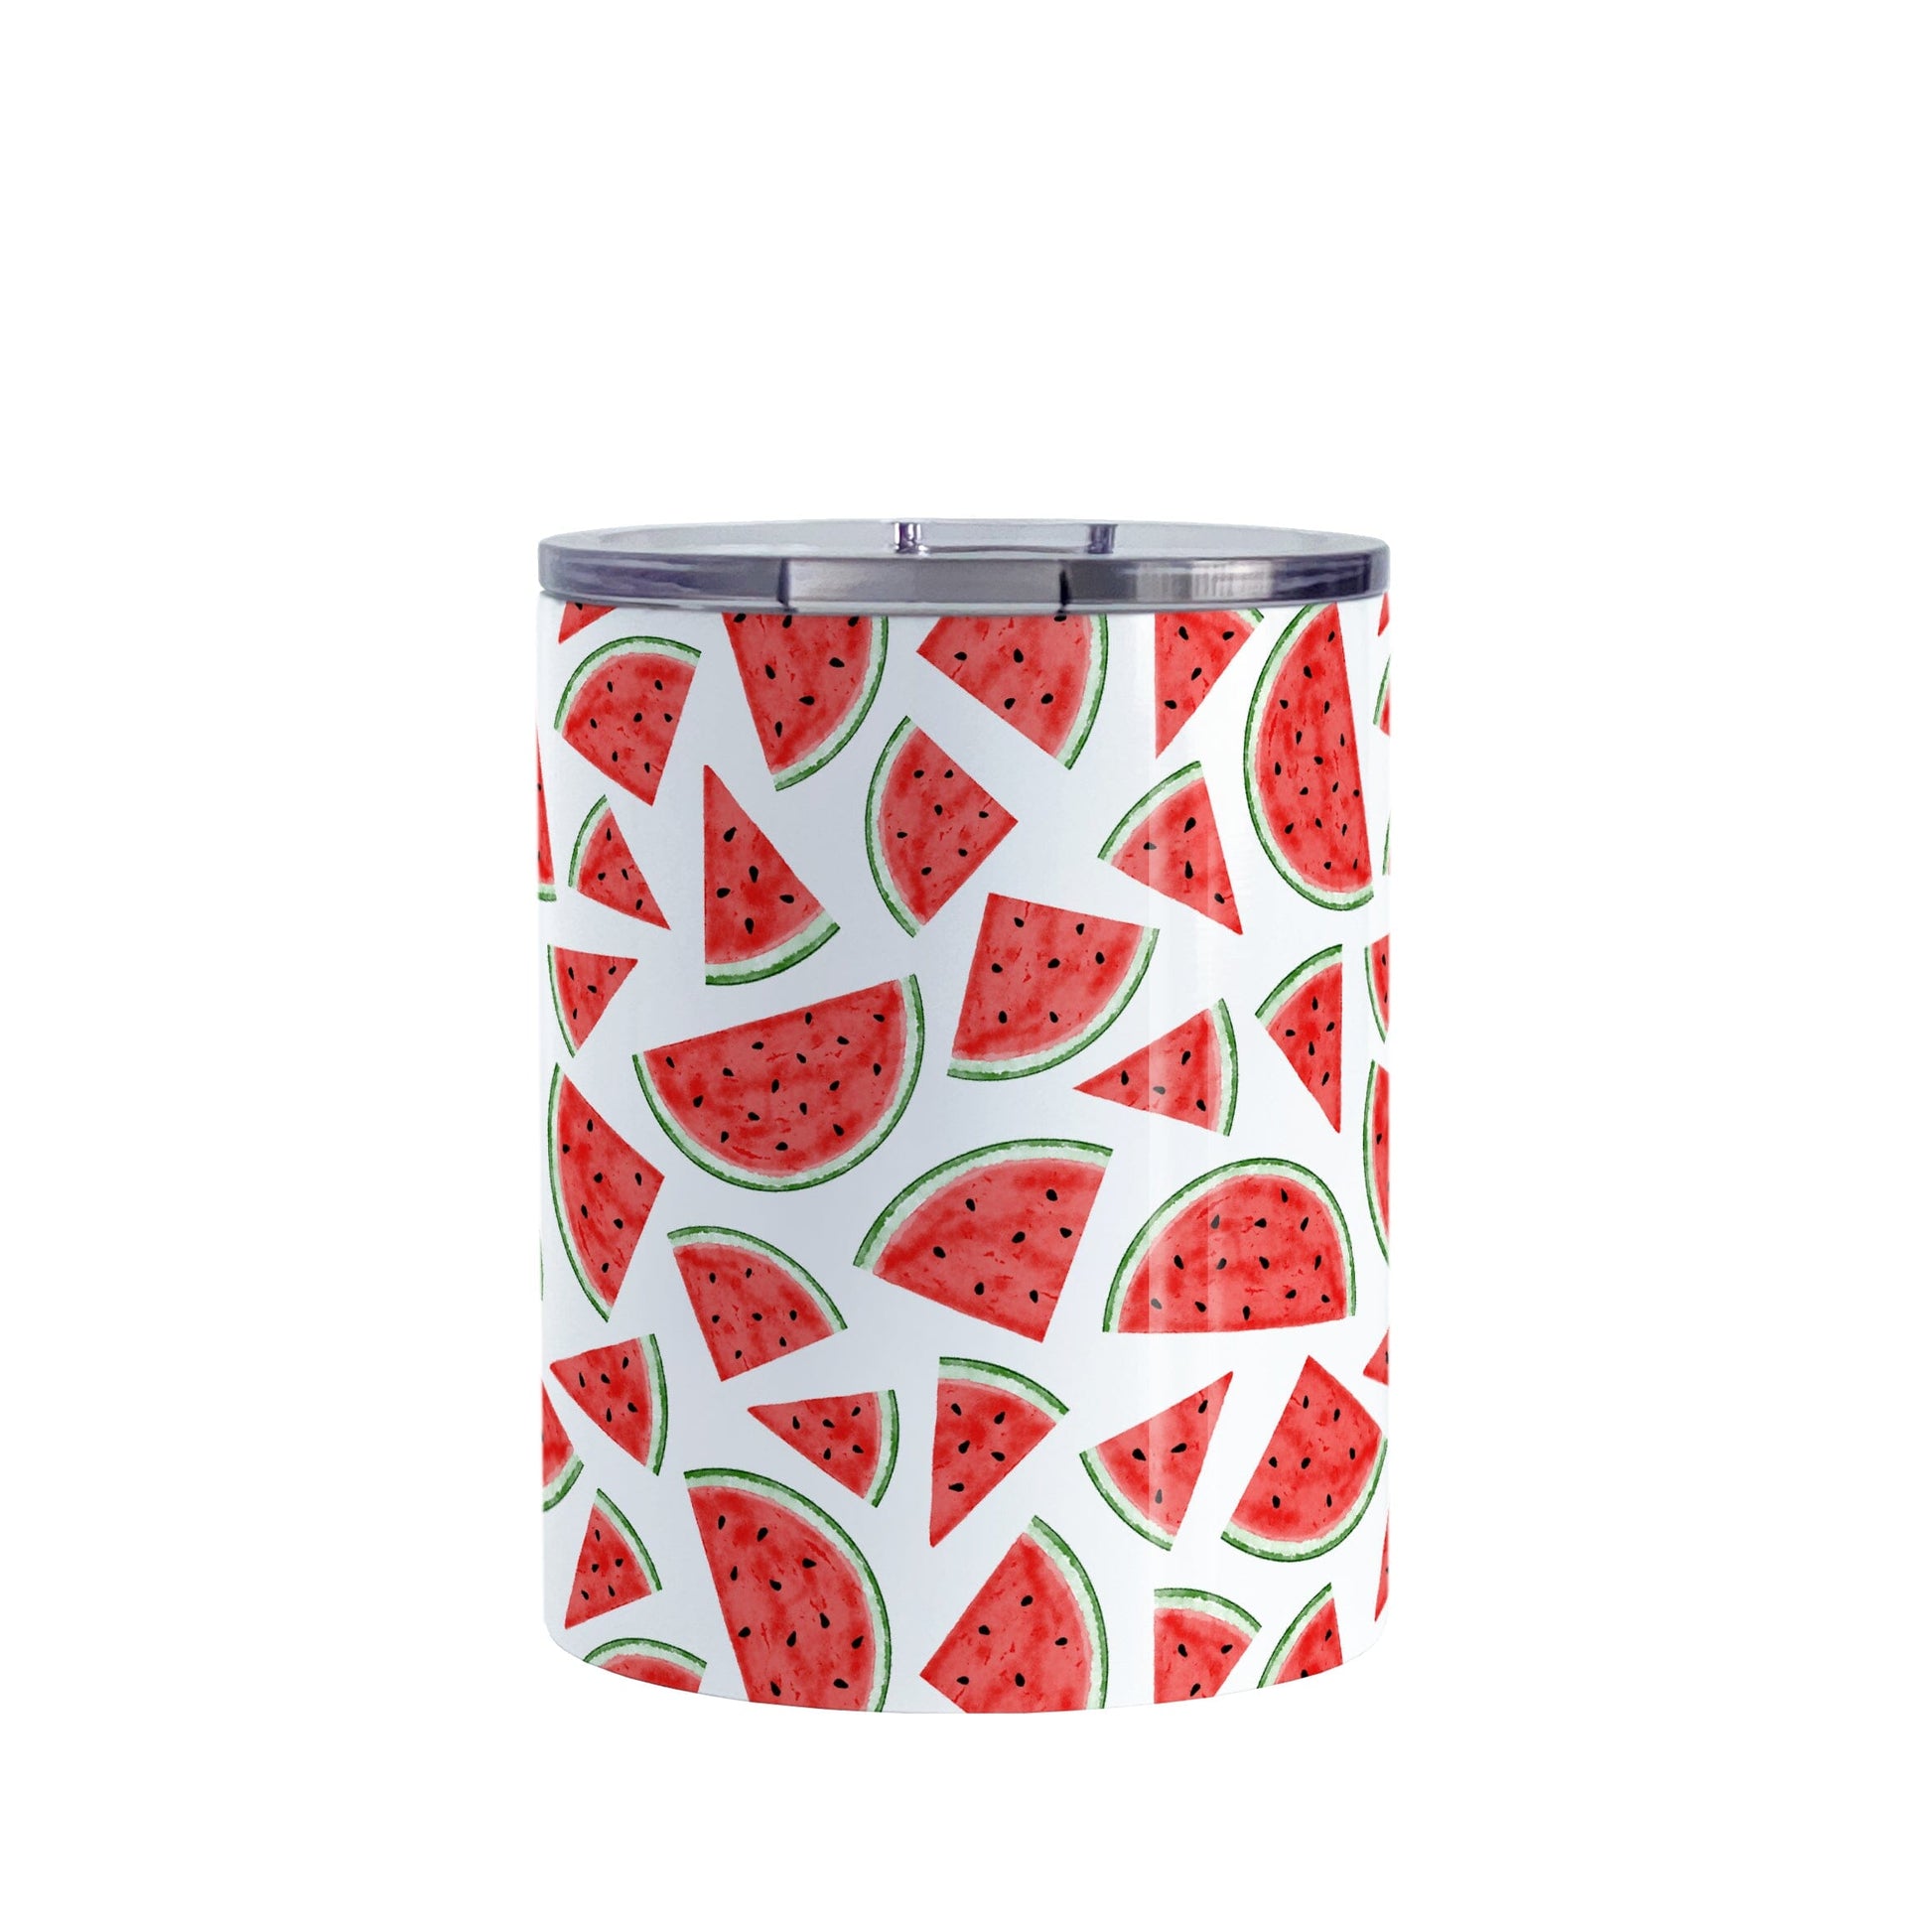 Watermelon Slices Tumbler Cup (10oz) at Amy's Coffee Mugs. A stainless steel tumbler cup with a sipping lid designed with a pattern of illustrated watermelon slices that wraps around the cup.